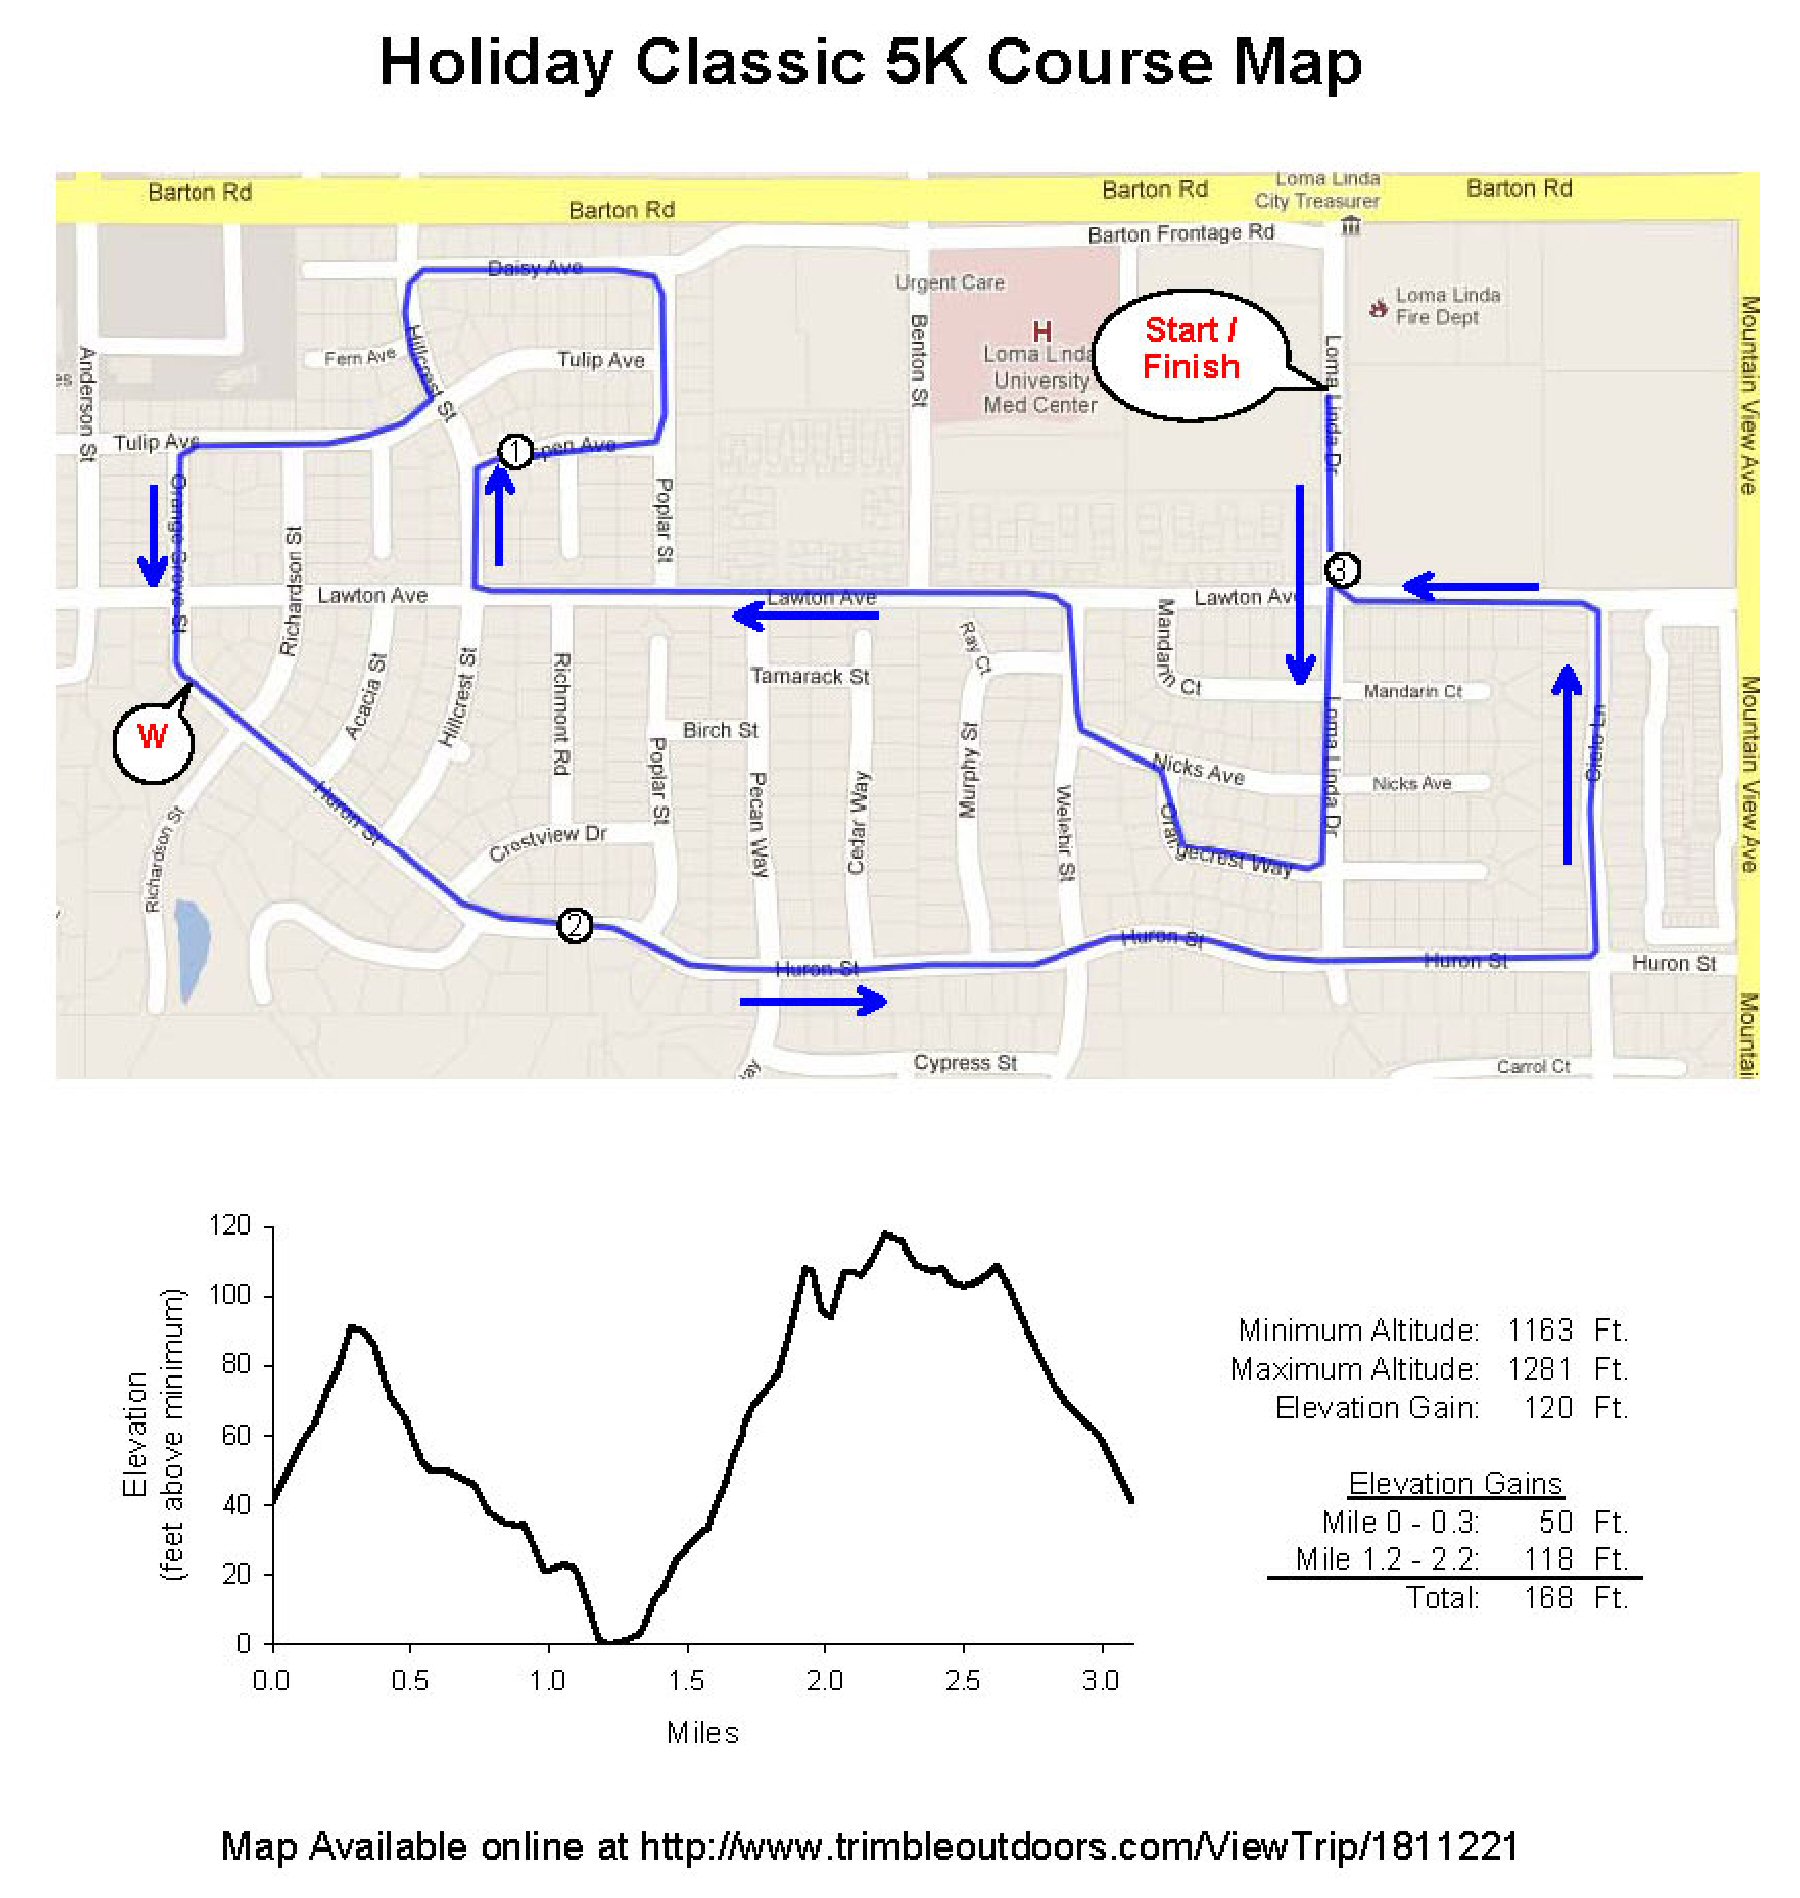 25th Annual Holiday Classic 5K Course Map with elevations.